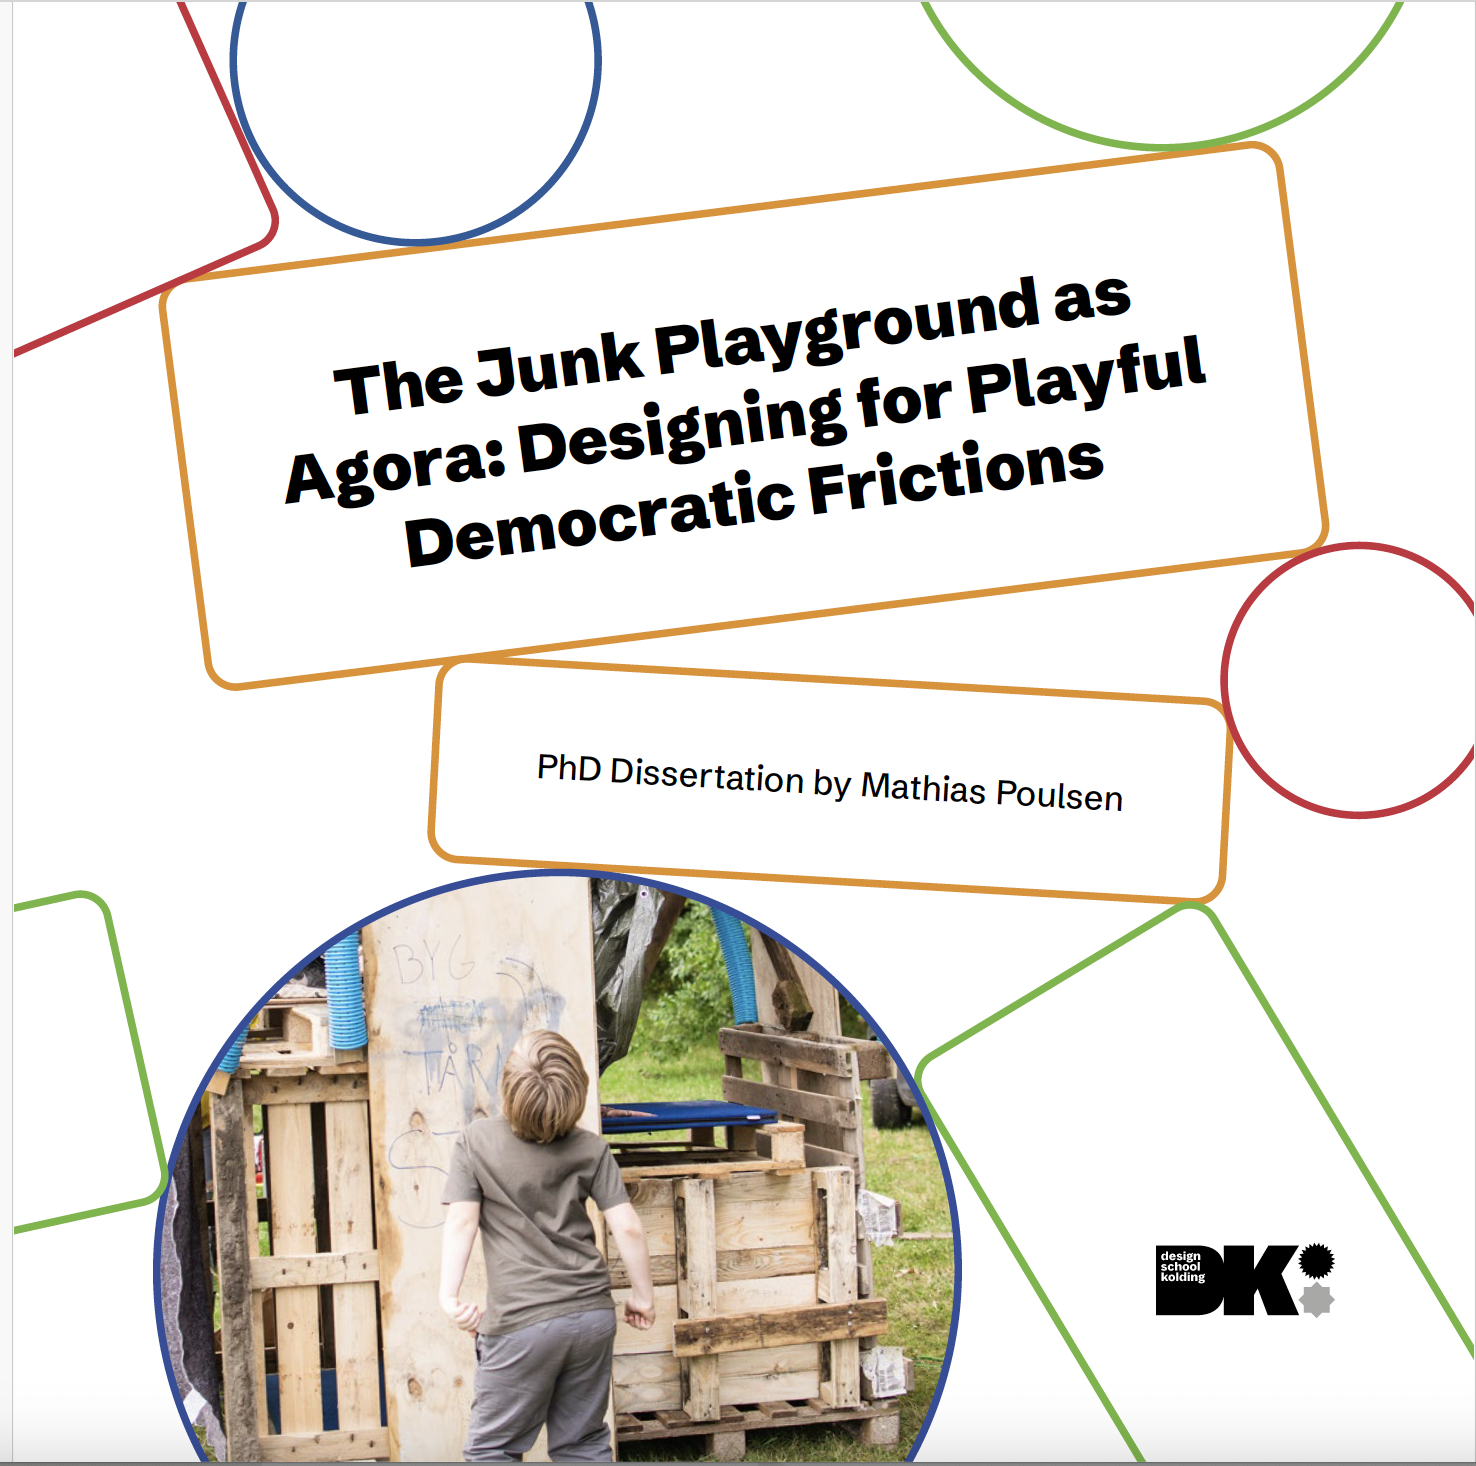 The Junk Playground as Agora: Designing for Playful Democratic Frictions